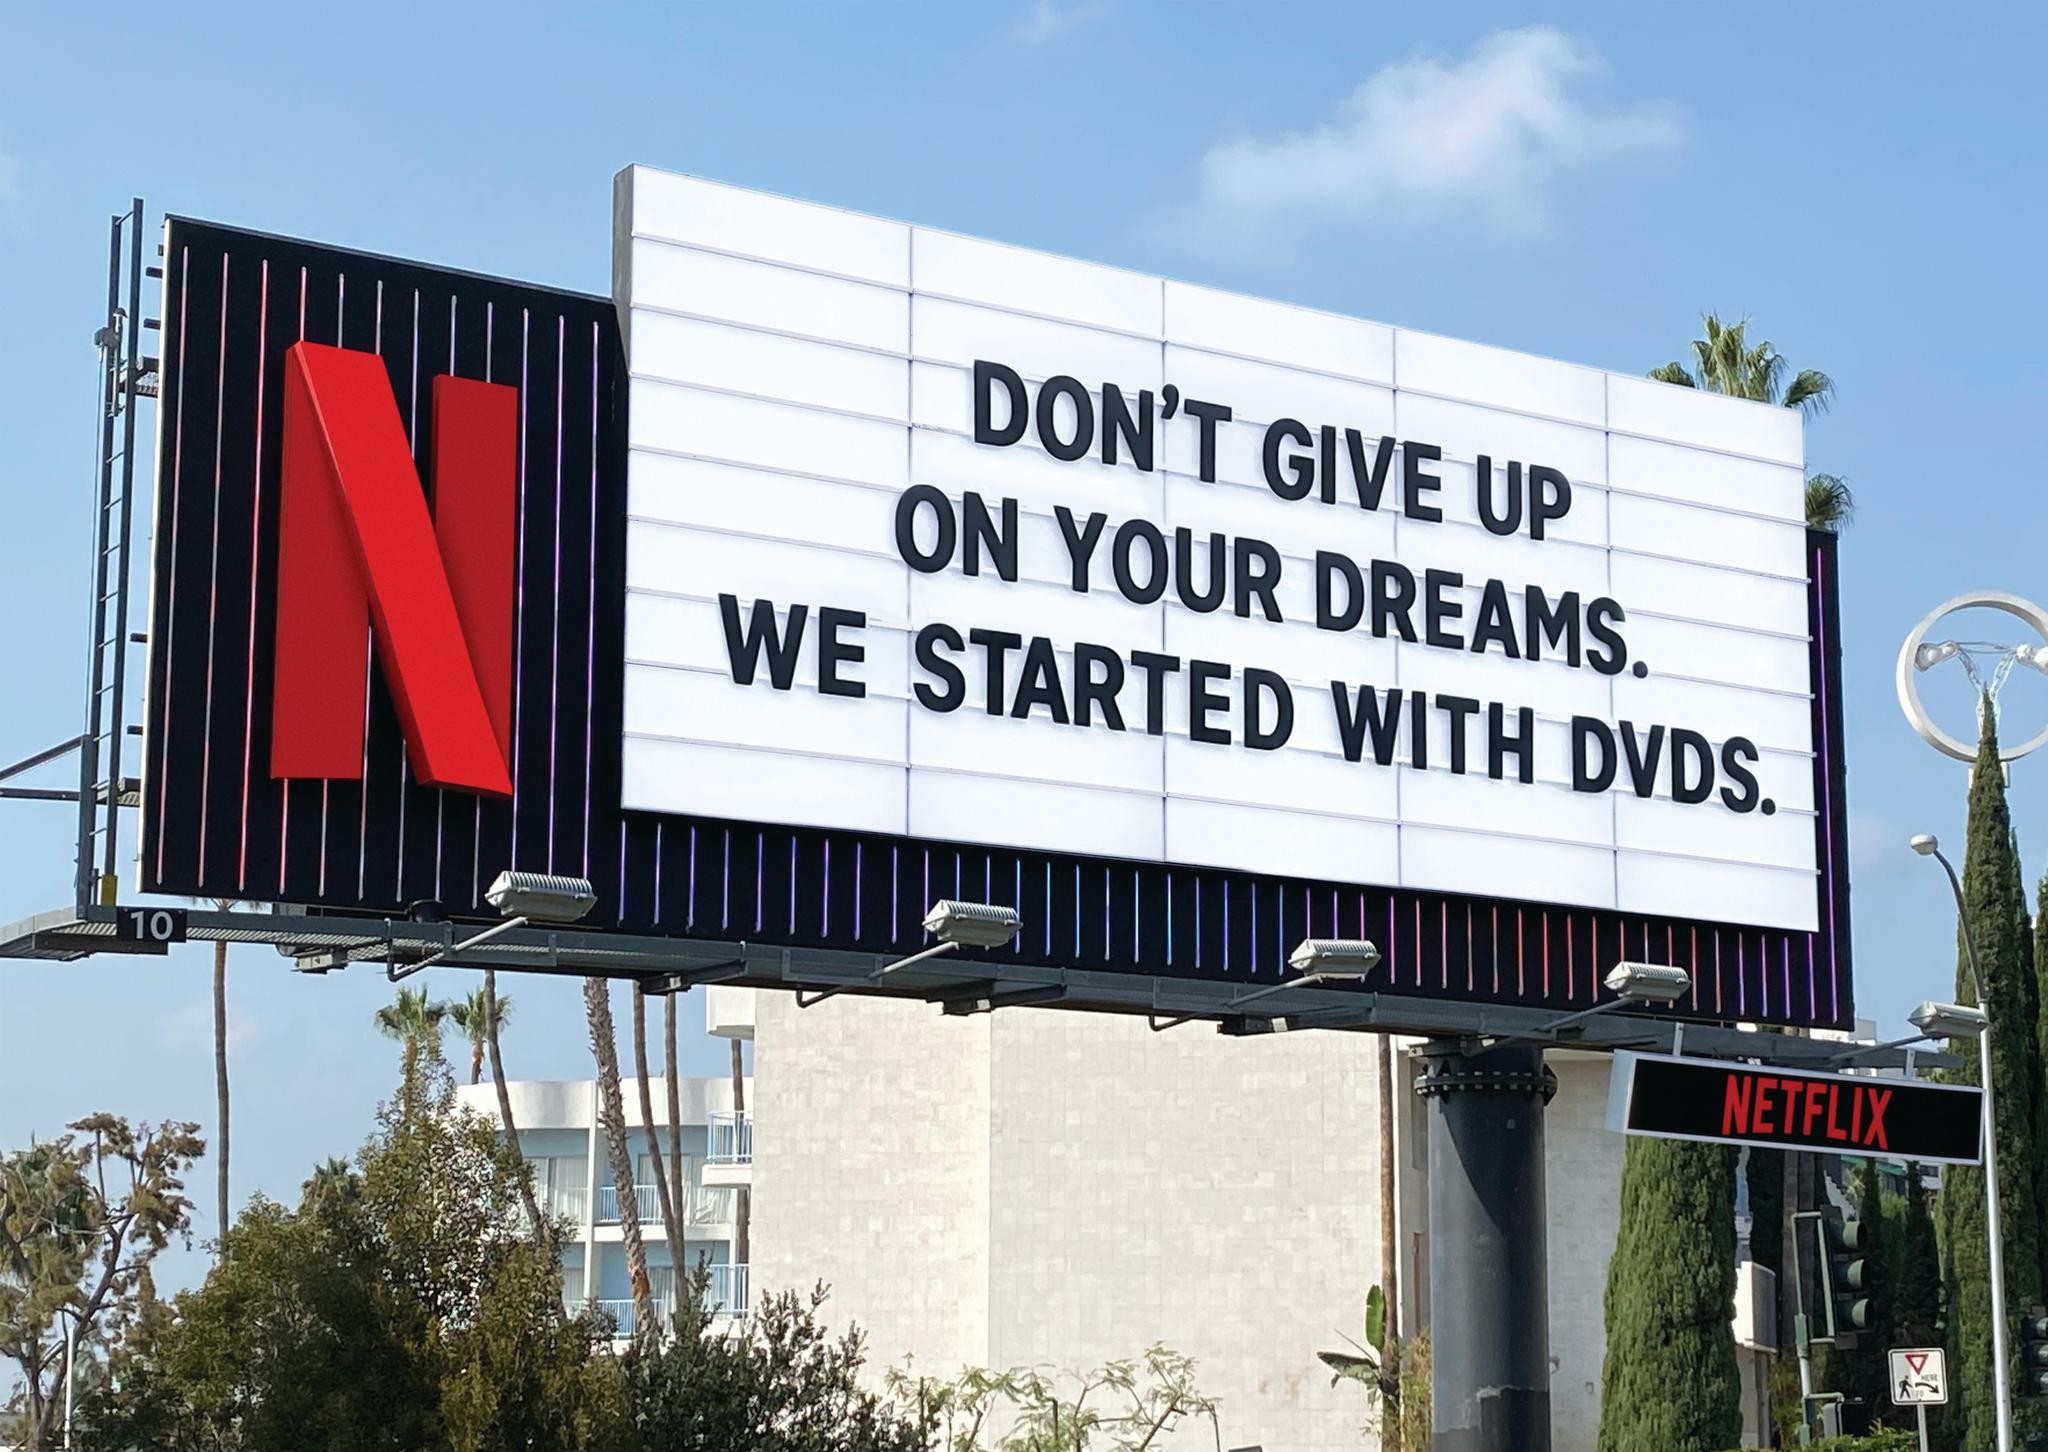 THE NETFLIX MARQUEE